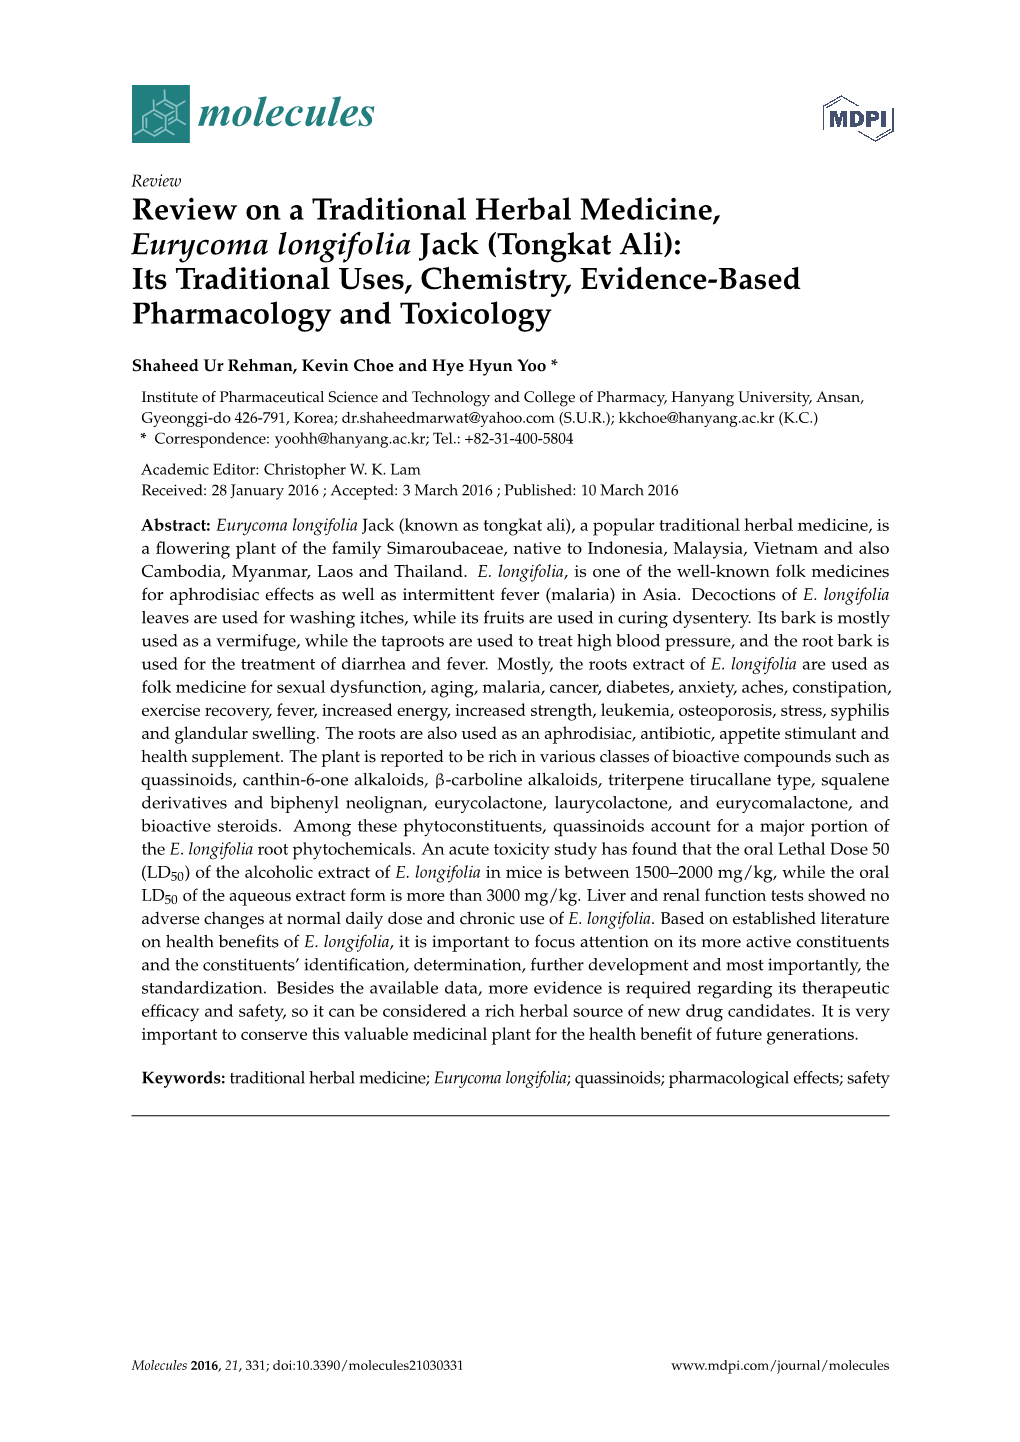 Review on a Traditional Herbal Medicine, Eurycoma Longifolia Jack (Tongkat Ali): Its Traditional Uses, Chemistry, Evidence-Based Pharmacology and Toxicology